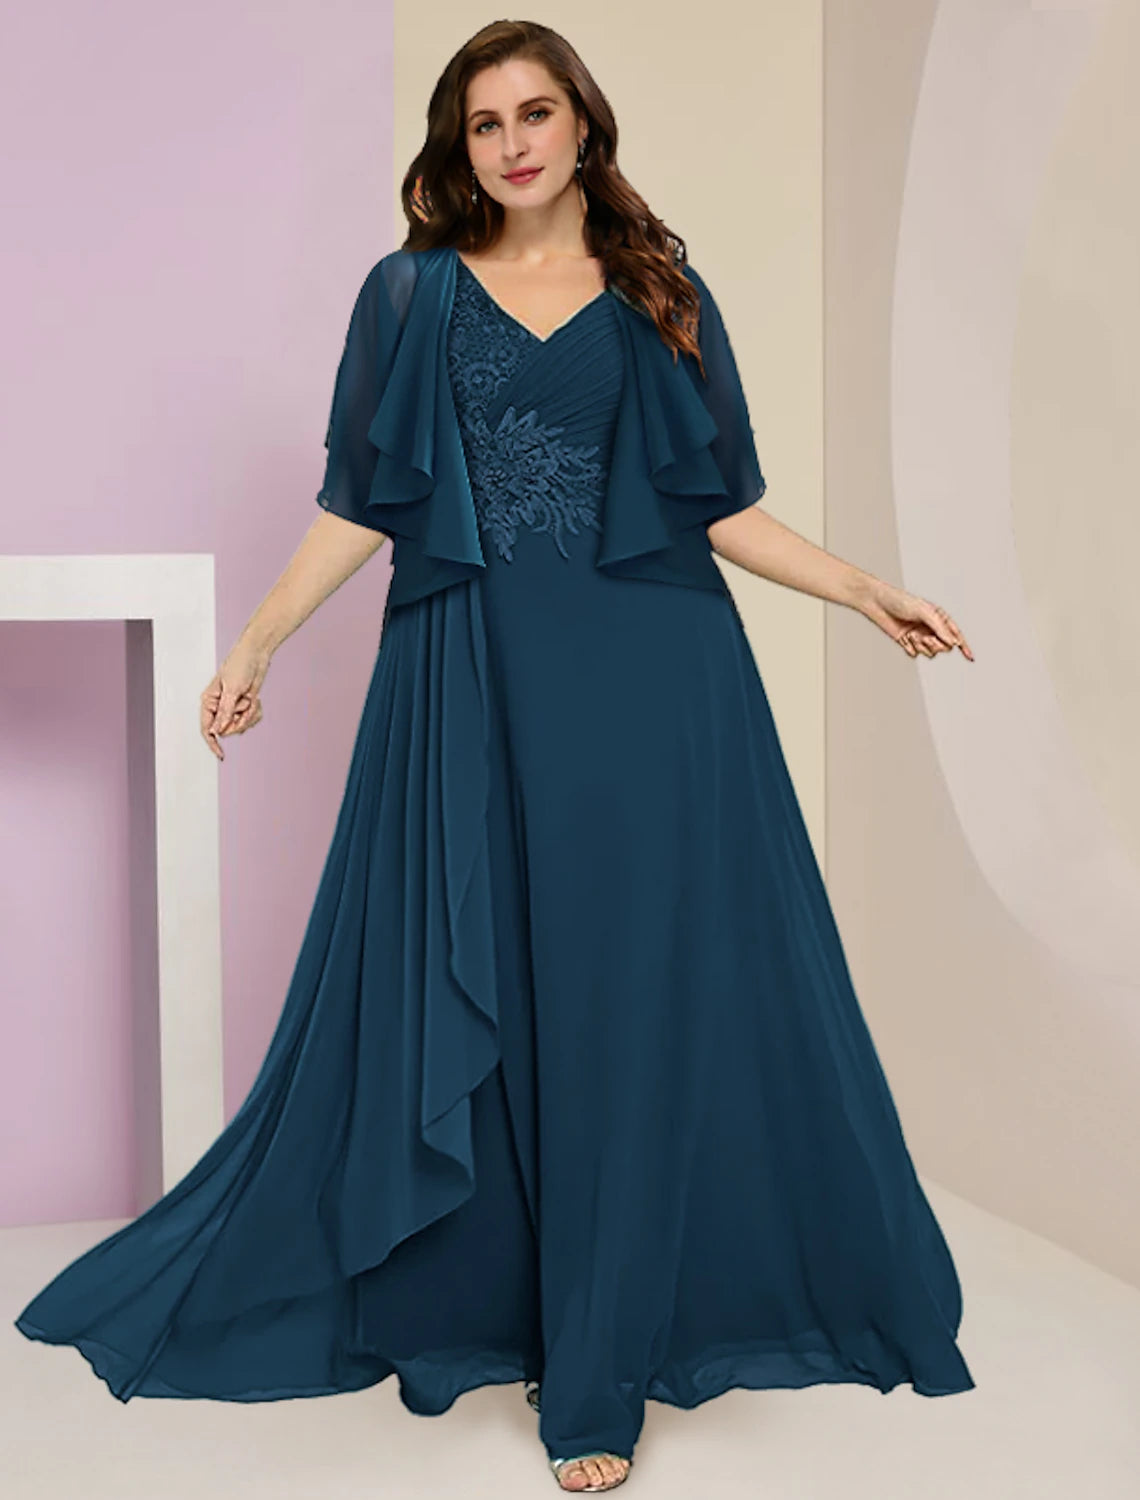 Two Piece A-Line Mother of the Bride Dress Formal Wedding Guest Elegant V Neck Floor Length Chiffon Lace Sleeveless with Ruched Appliques